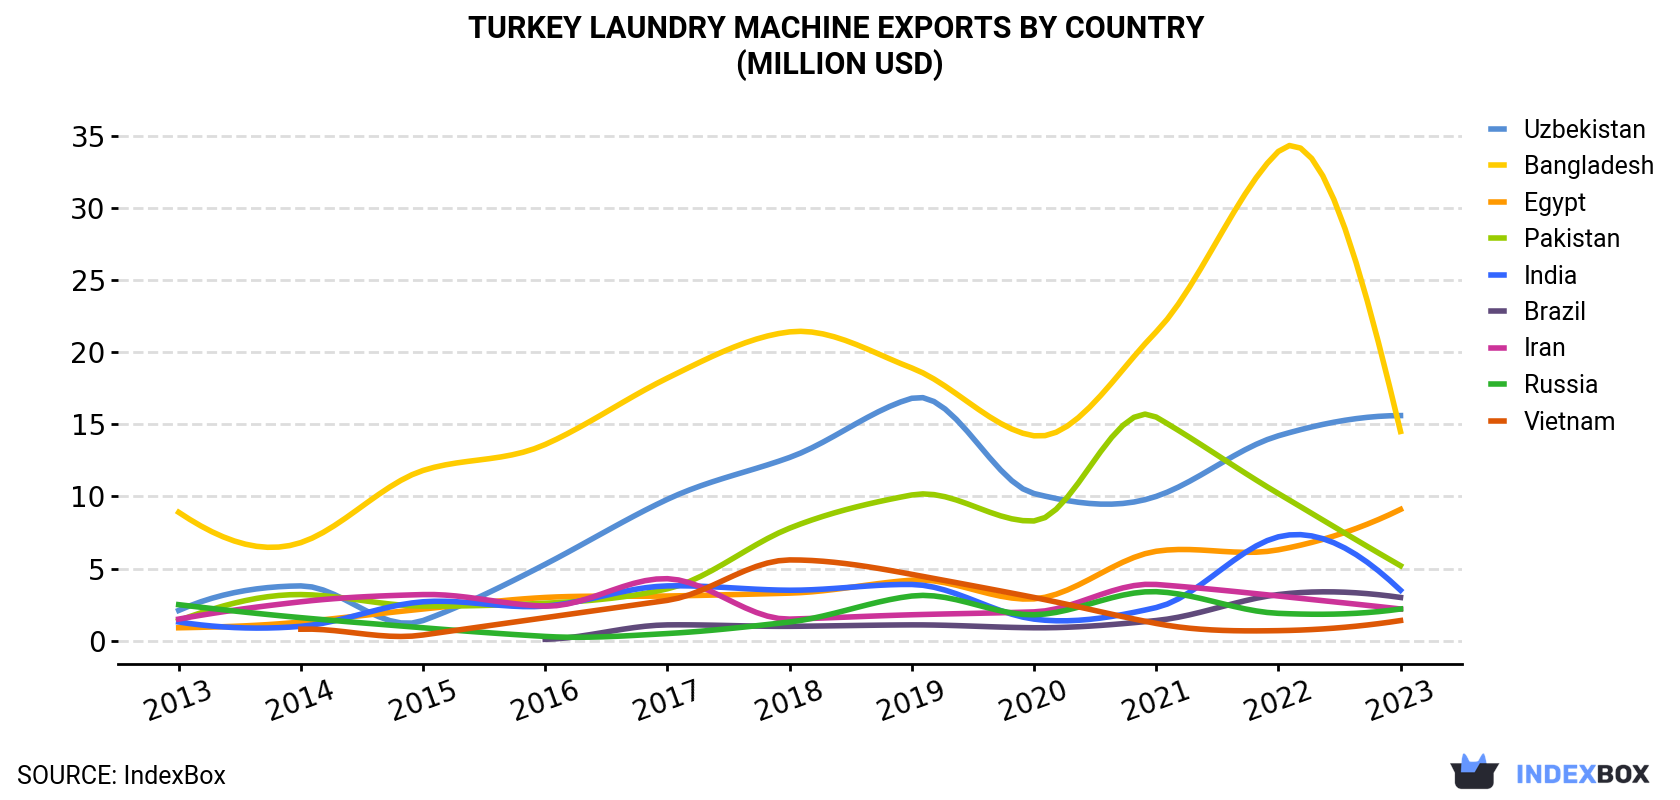 Turkey Laundry Machine Exports By Country (Million USD)